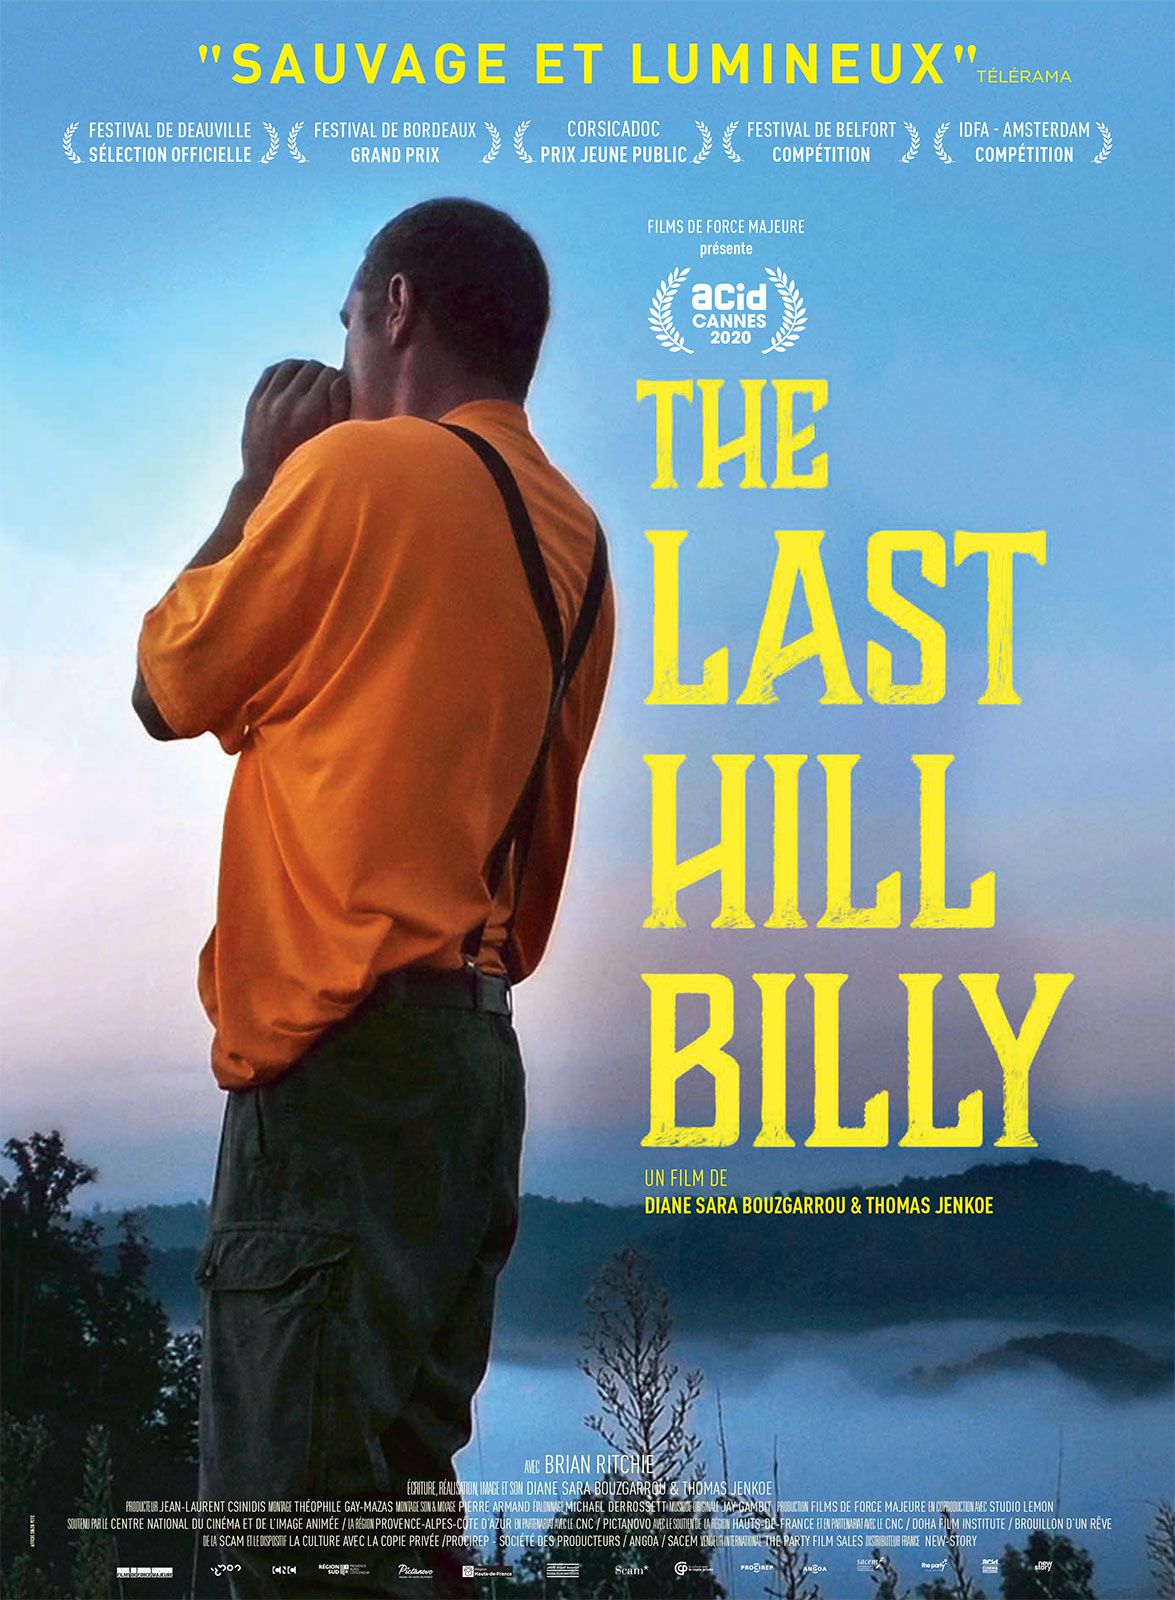 The Last Hillbilly - Documentaire (2020) streaming VF gratuit complet